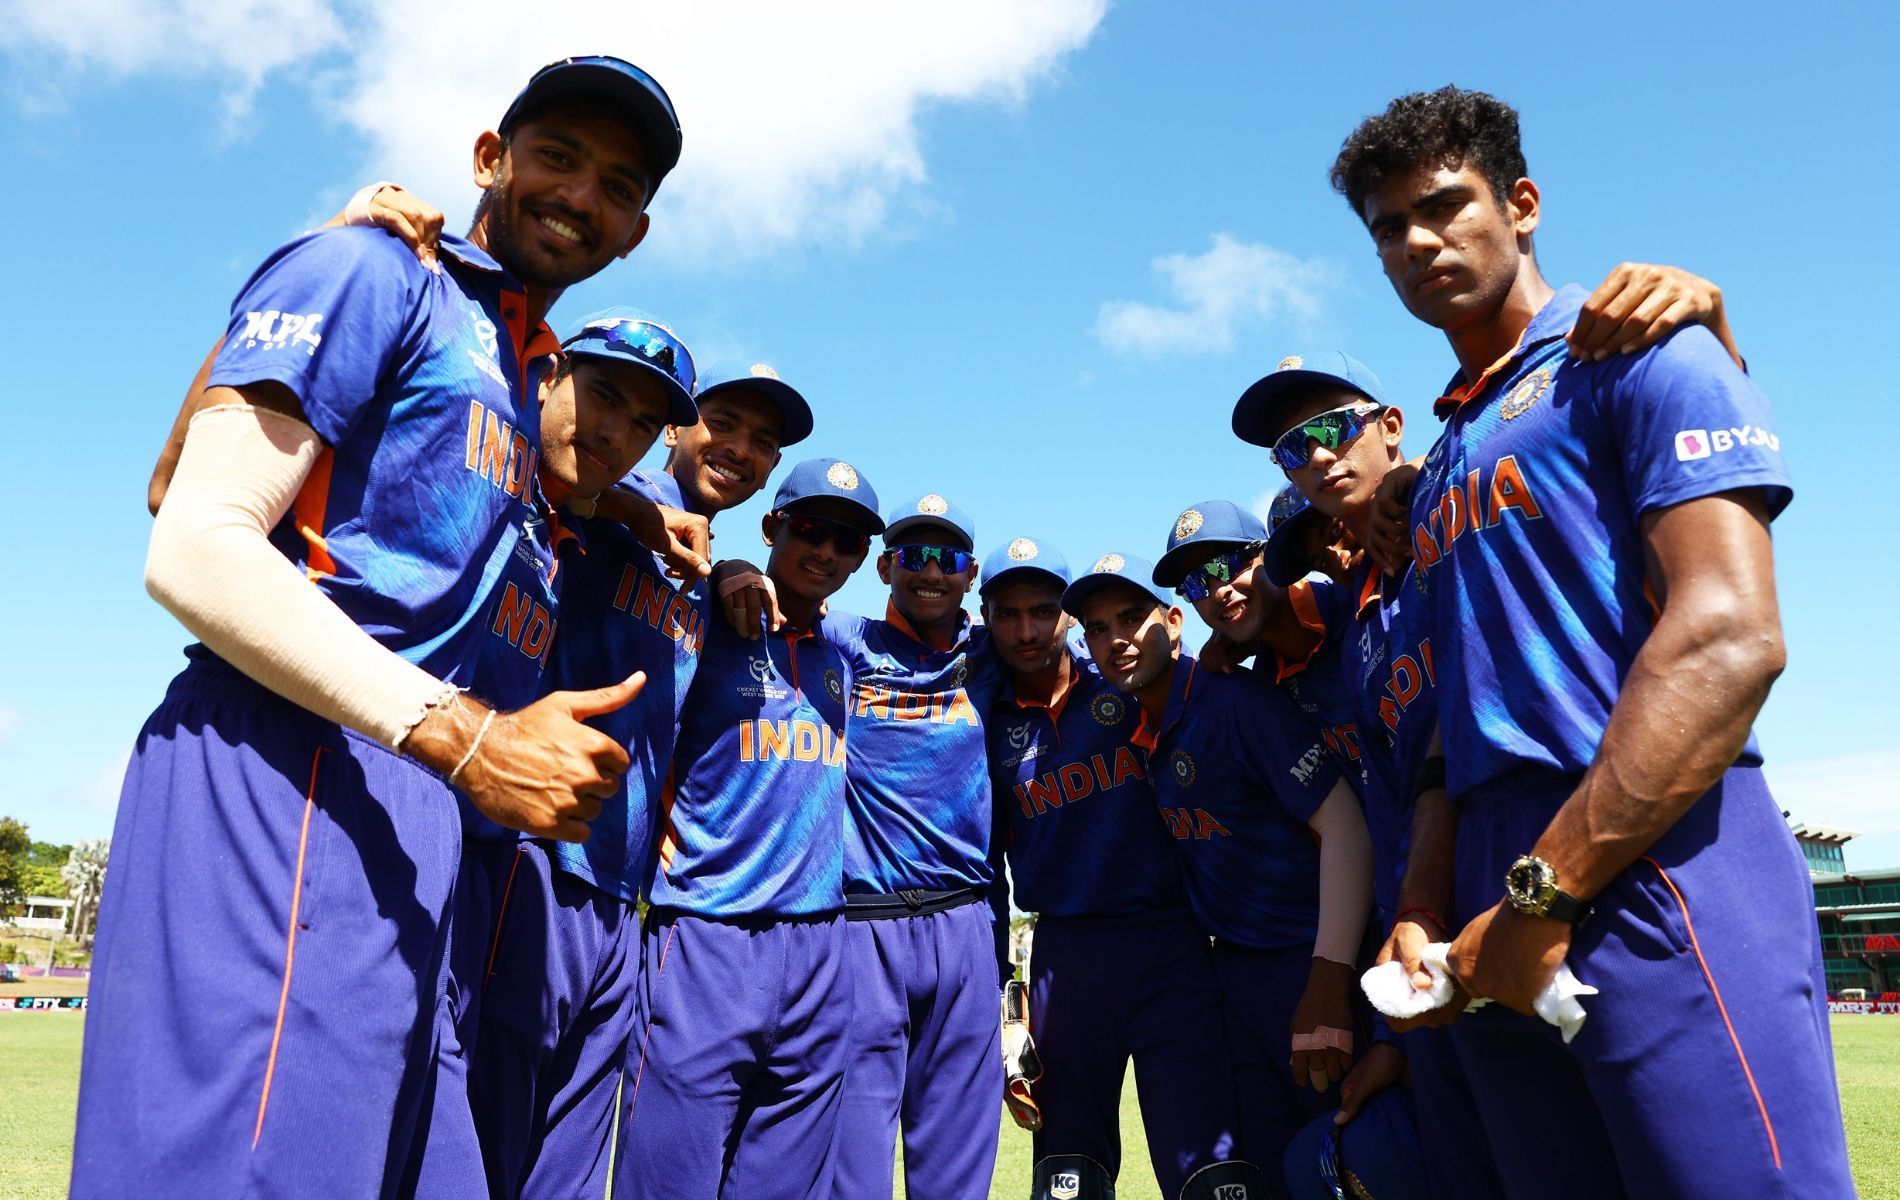 India U-19 players celebrate after the win in the semi-final.